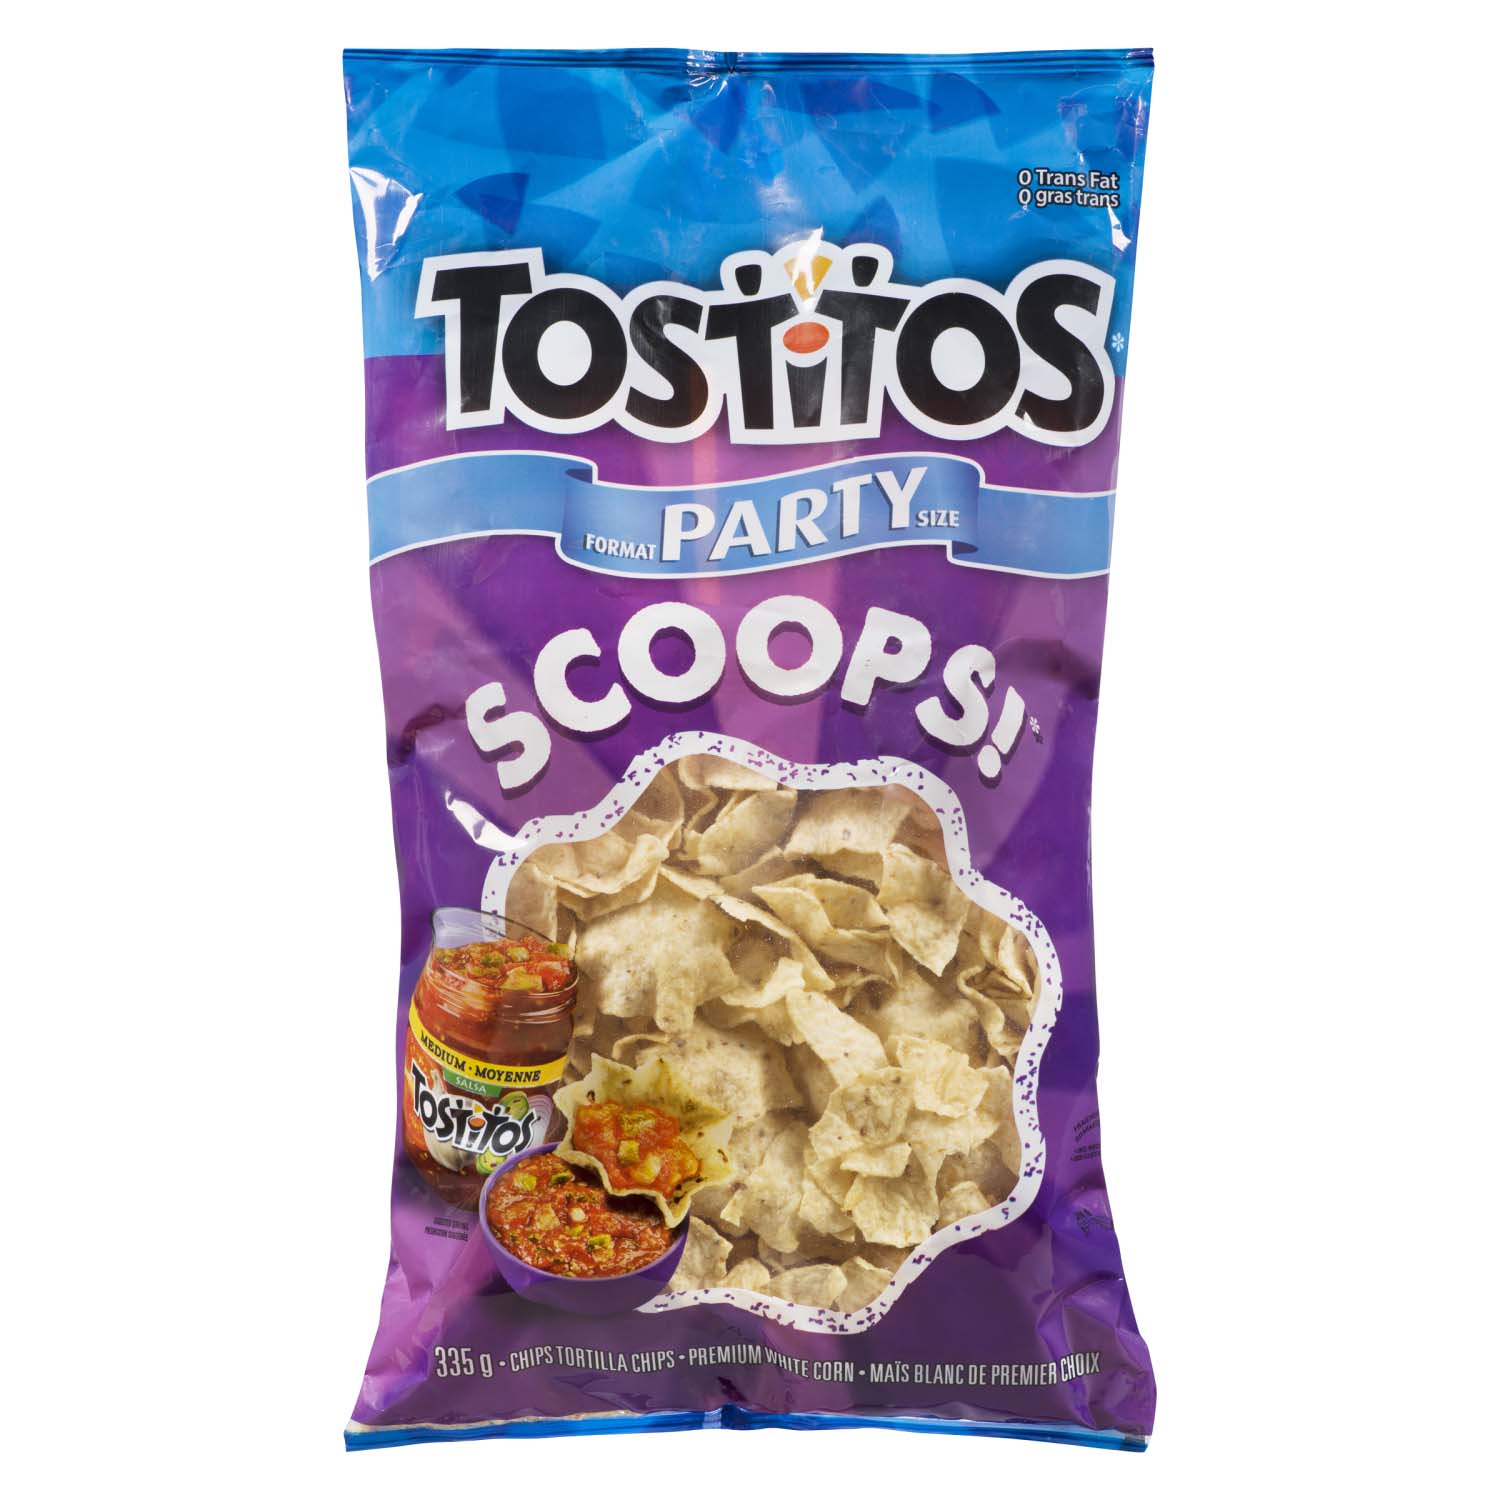 Tostitos Scoops! Premium White Corn Tortilla Chips Party Size 335 g